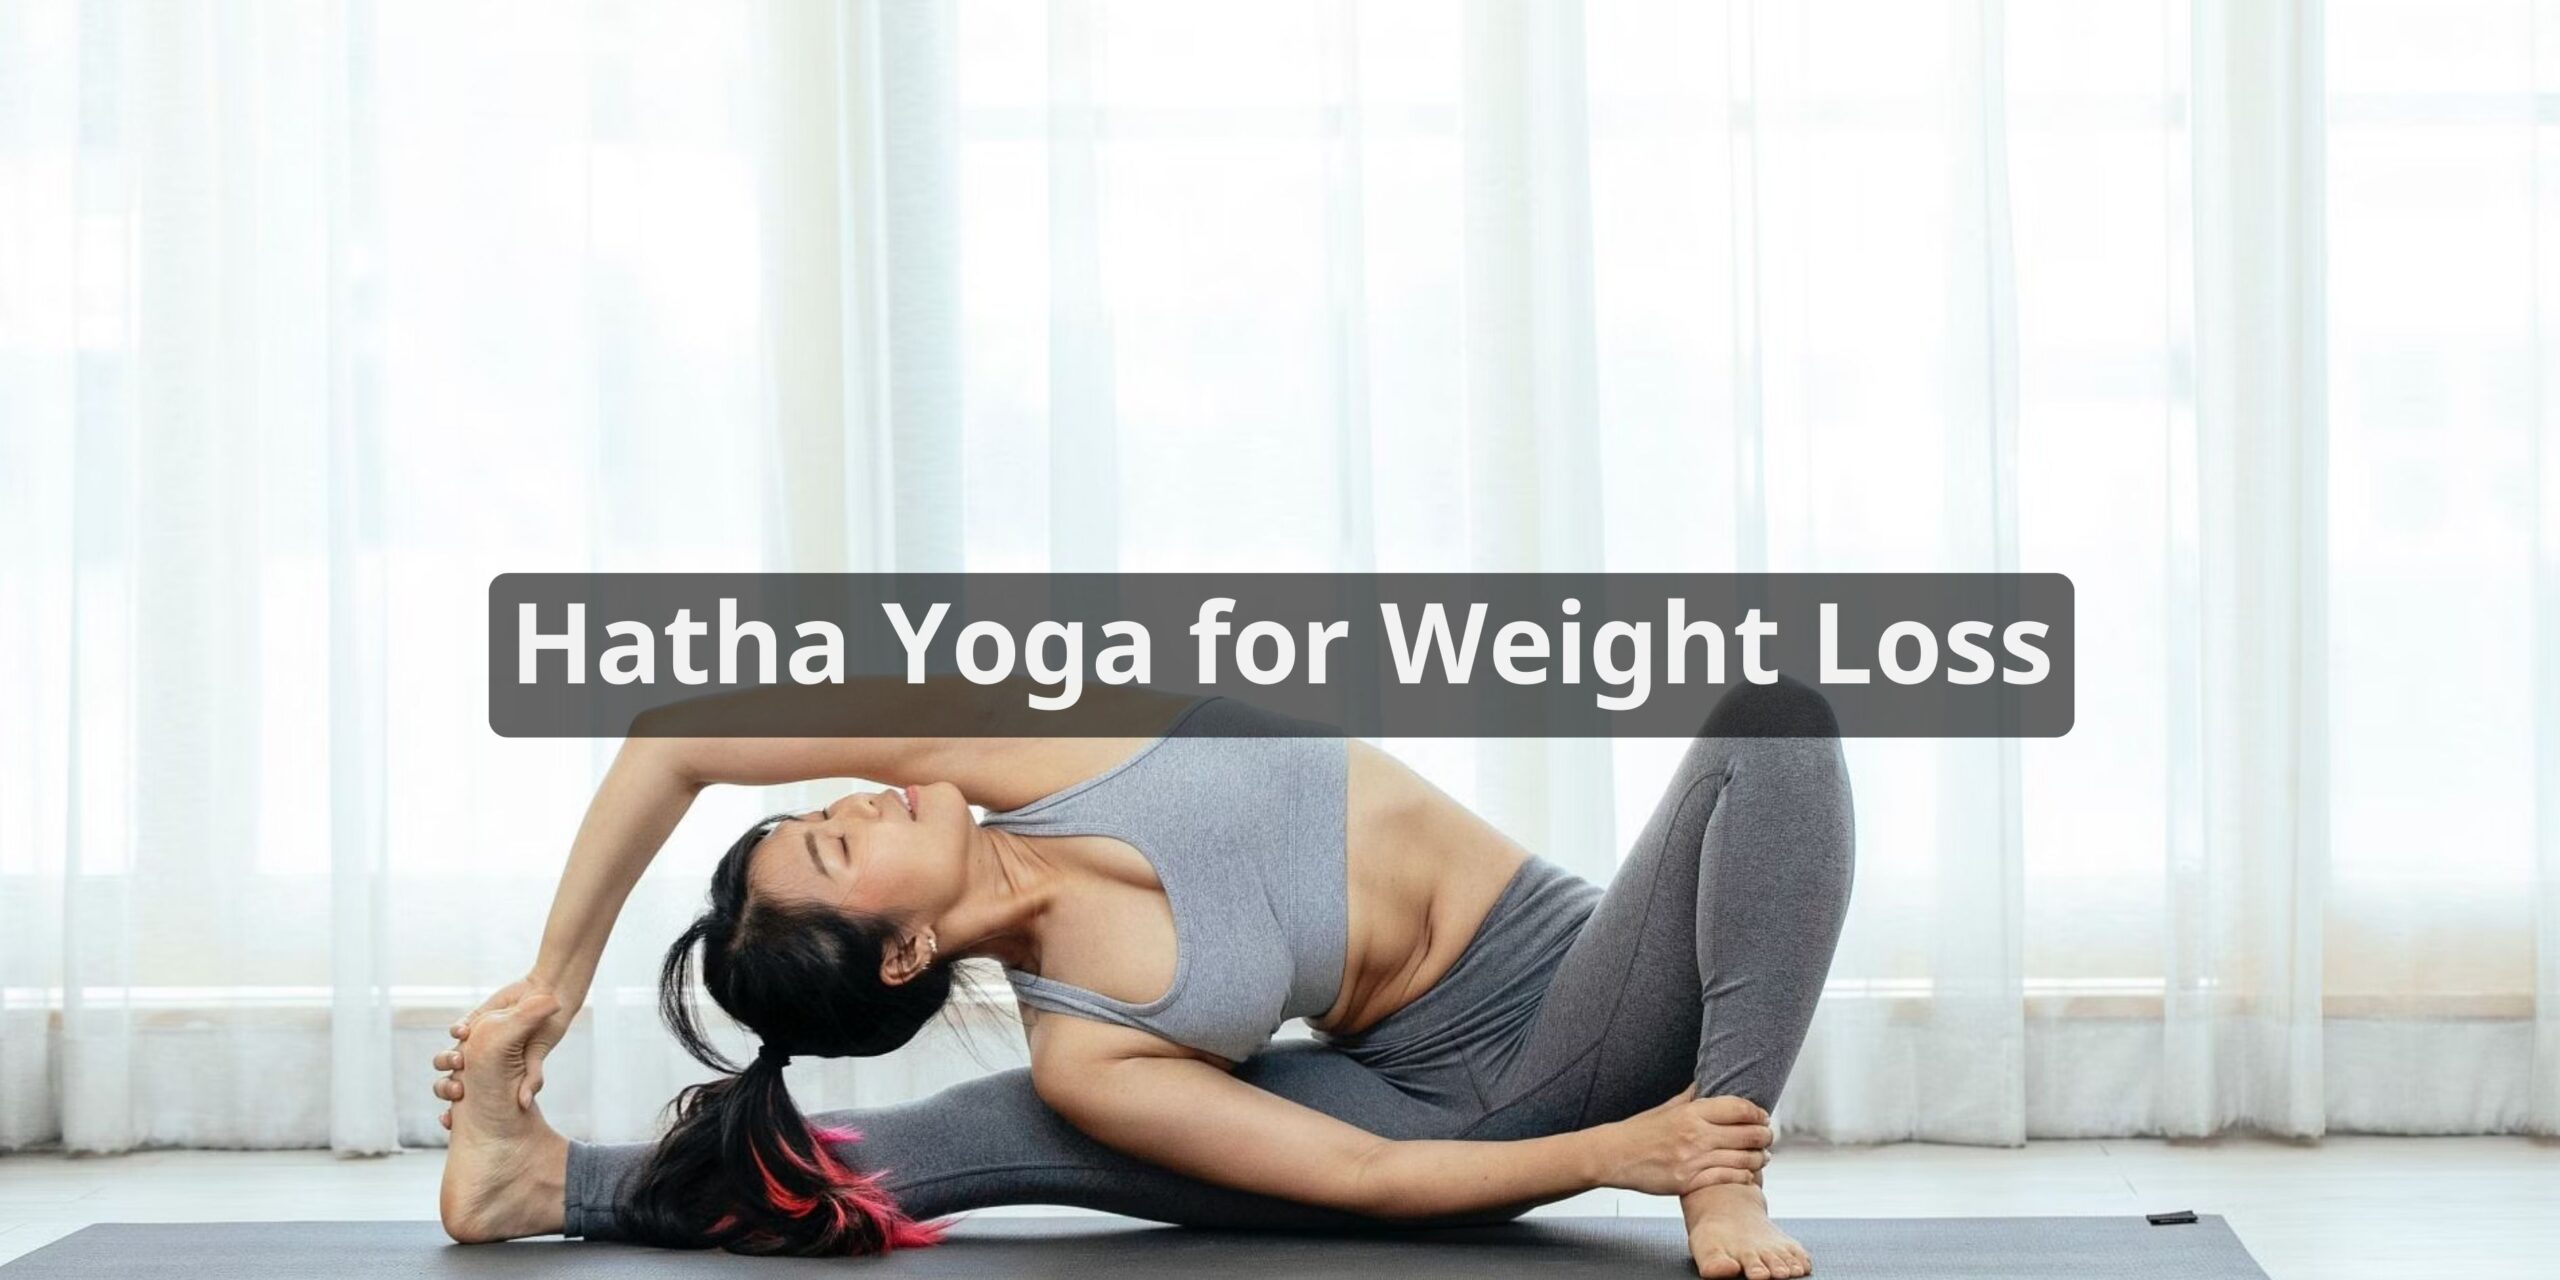 Hatha Yoga for Weight Loss